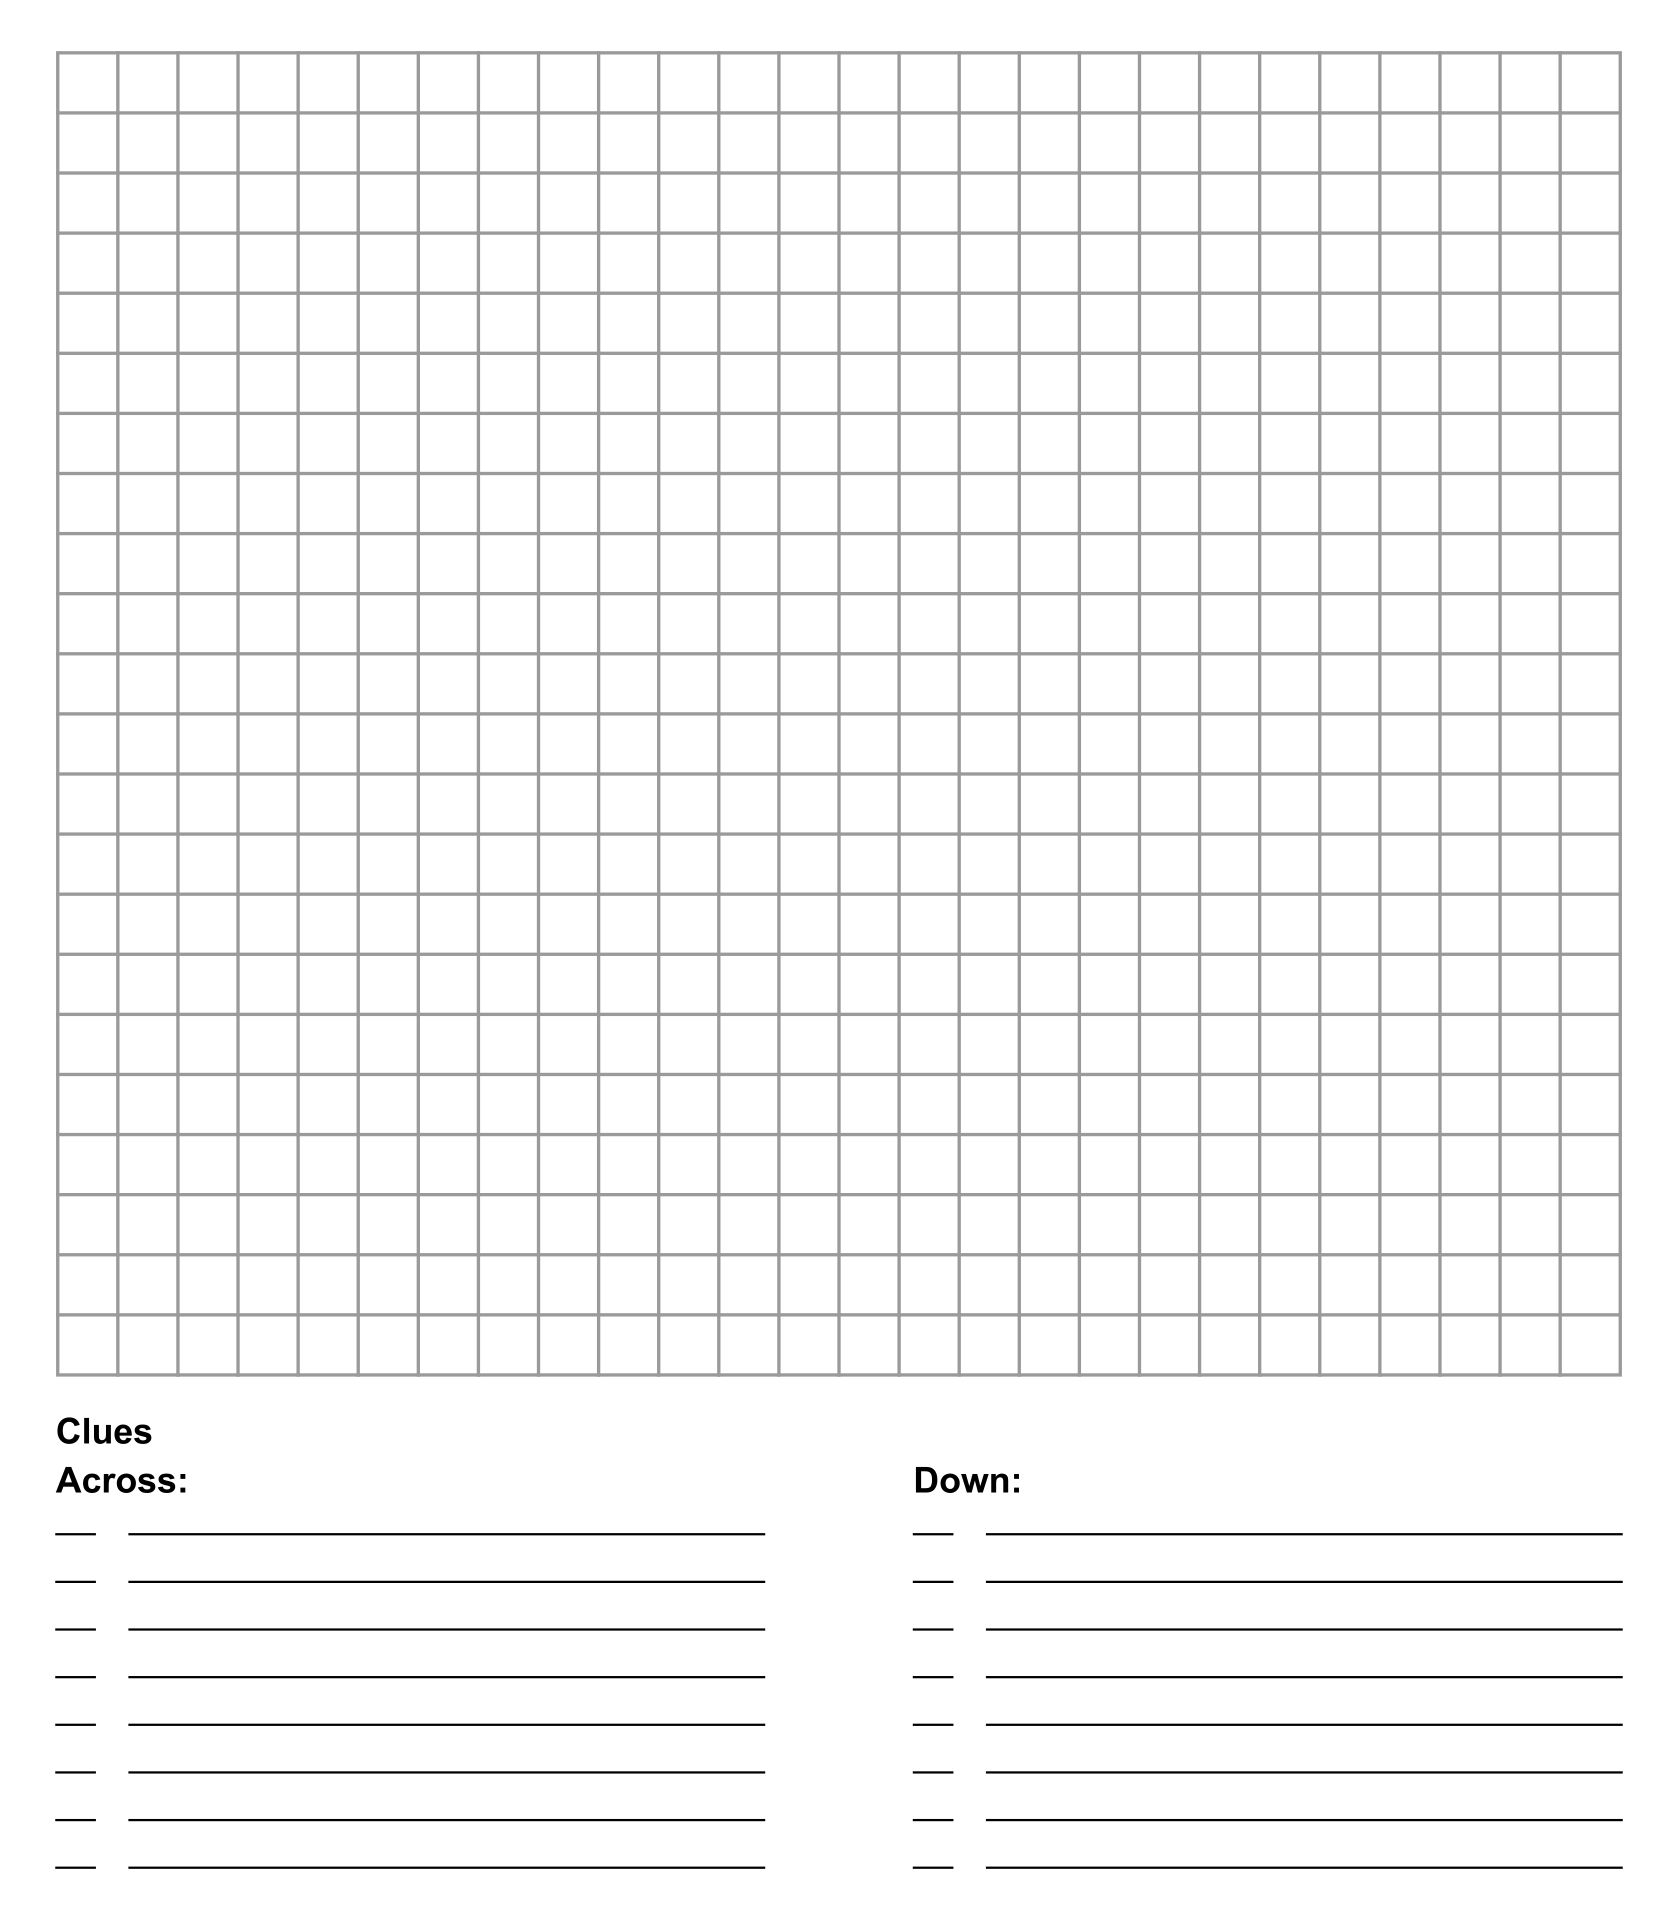 Free Make Your Own Crossword Puzzle Printable_48325